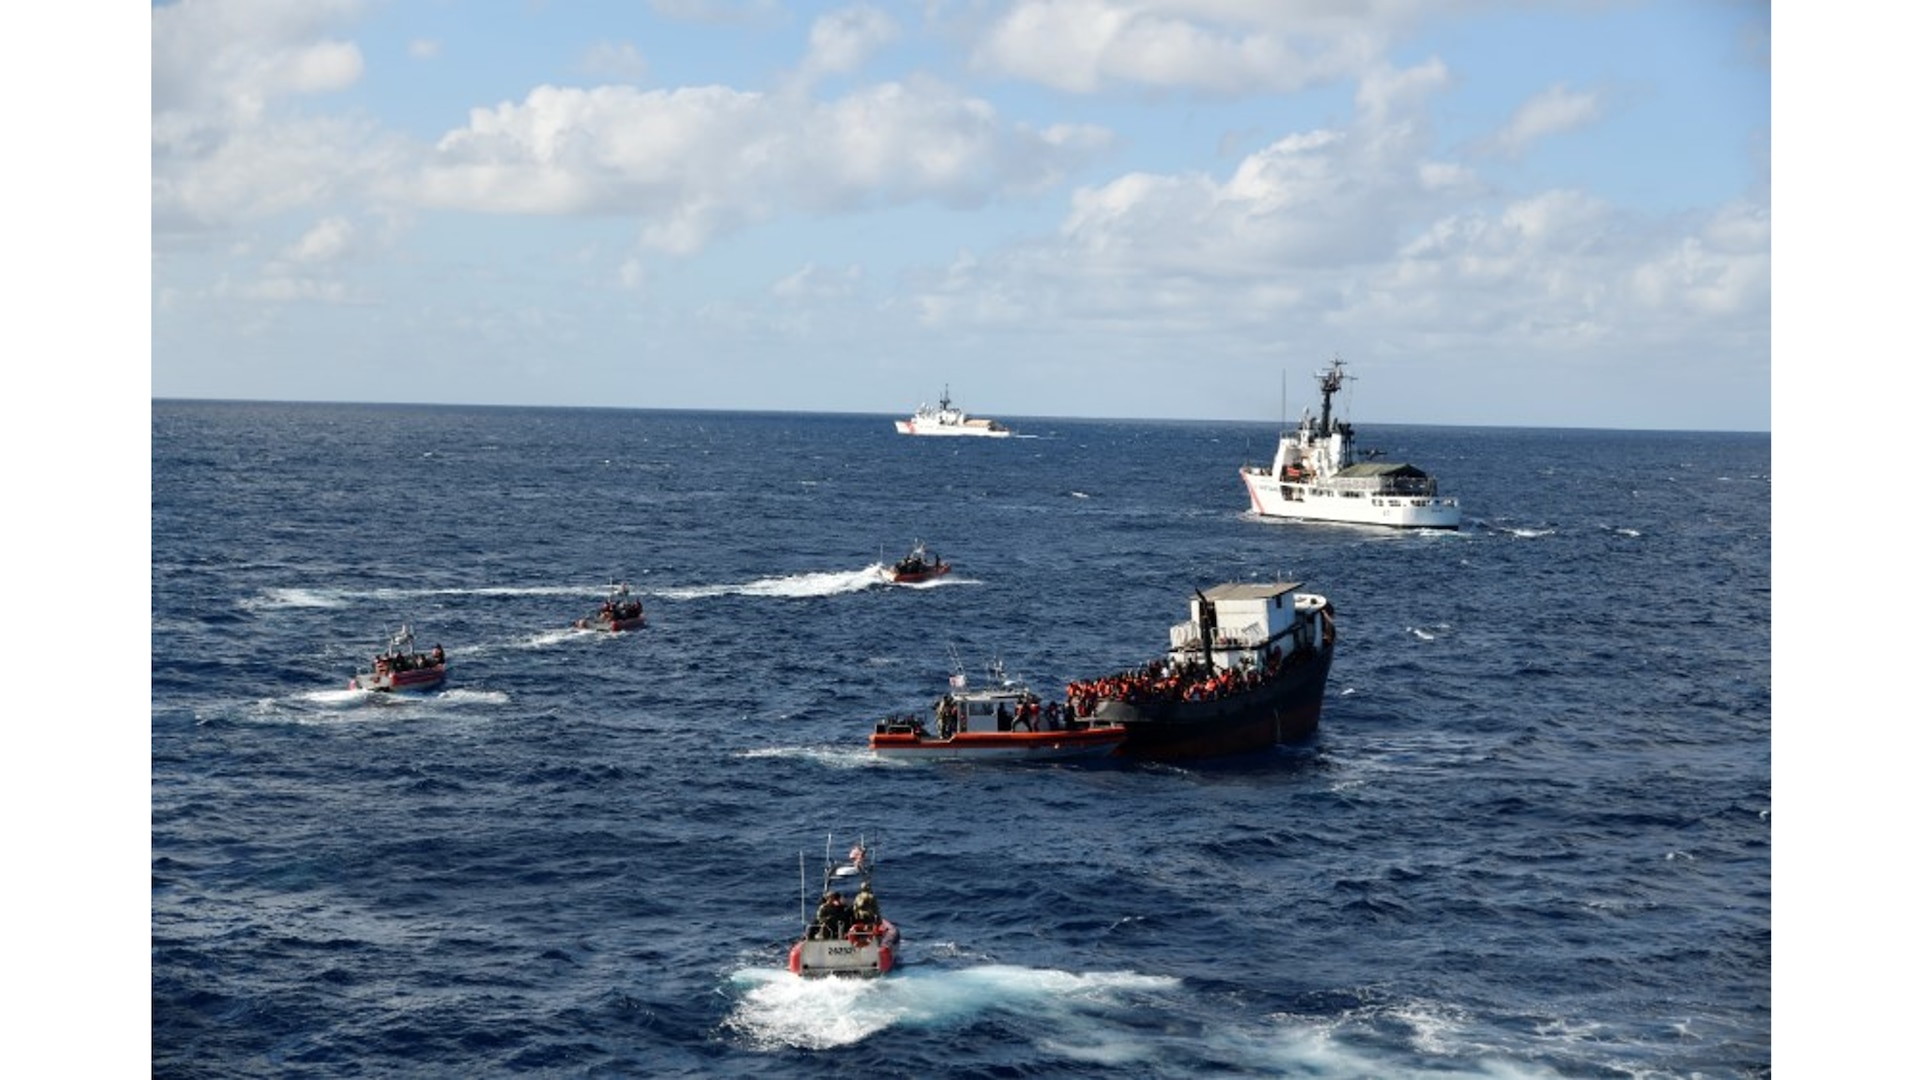 Multiple Coast Guard units stopped the illegal voyage of an overloaded 80-foot motor vessel, 30 miles northeast of Caibarien, Cuba, Feb. 15, 2023. There were over 300 people aboard the Haitian-suspected, migrant voyage vessel. (U.S. Coast Guard photo by Cutter James' crew)